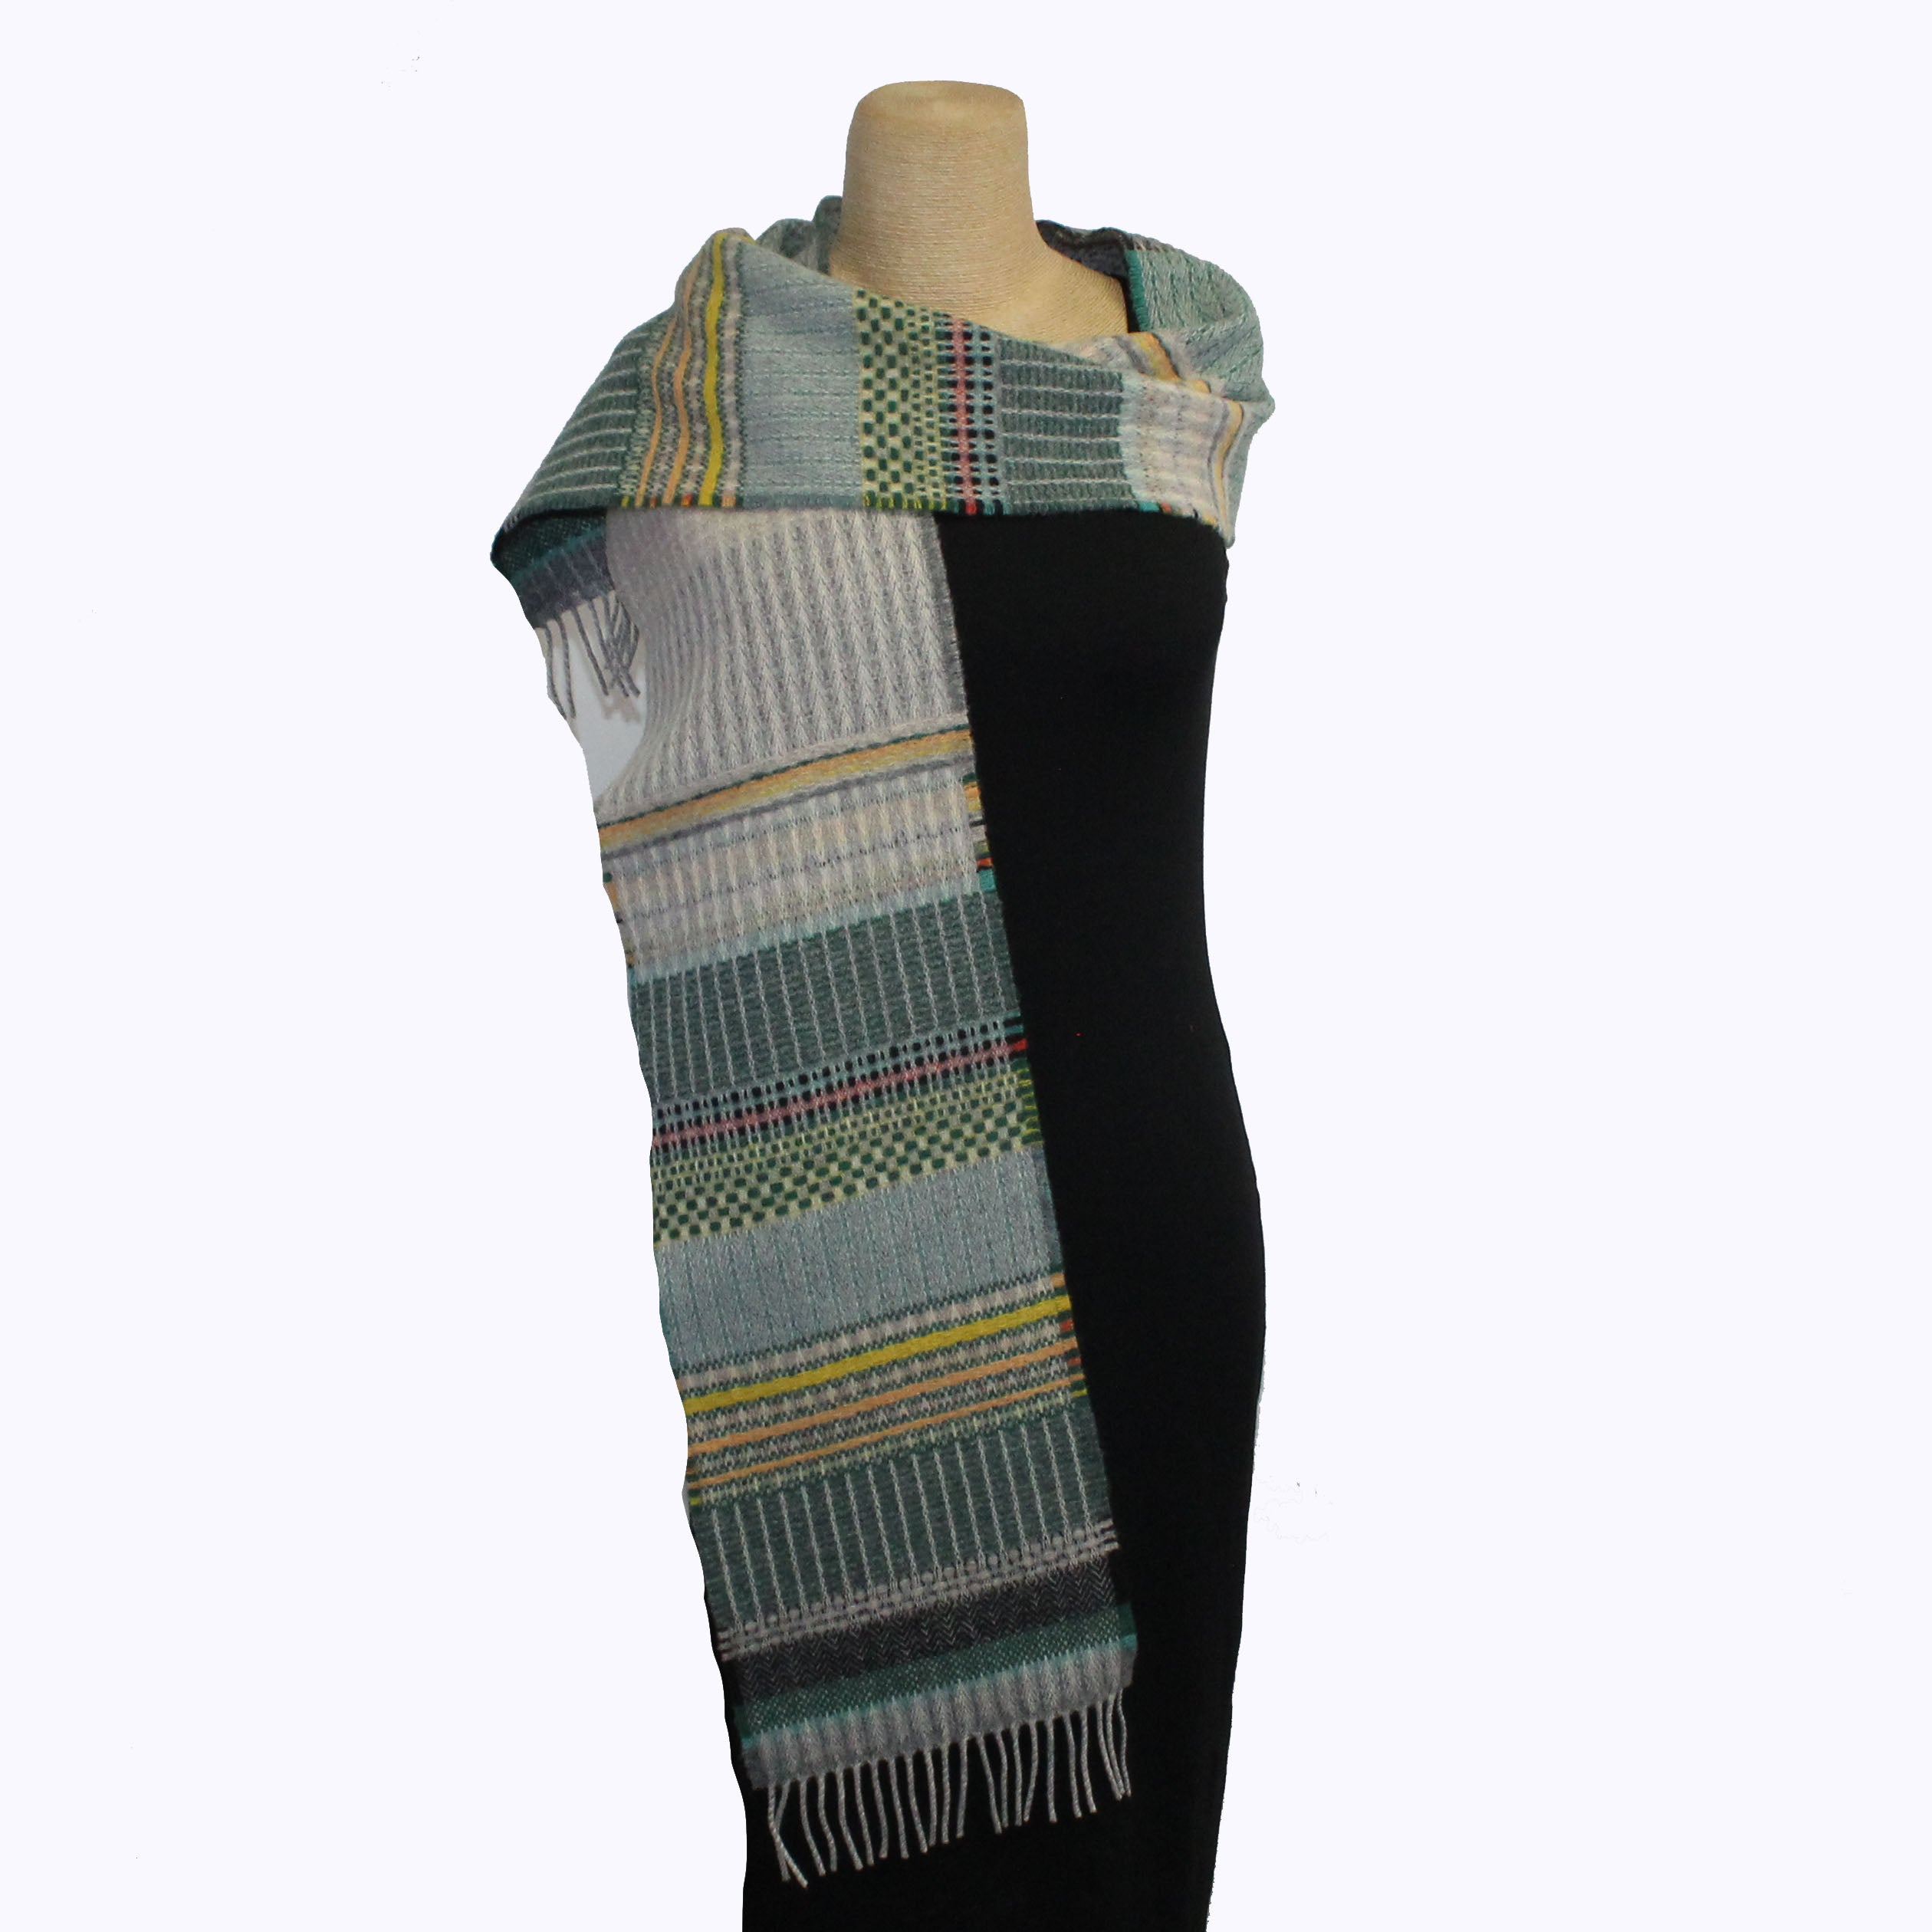 Wallace Sewell Scarf, Wainscott, Turquoise/Grey